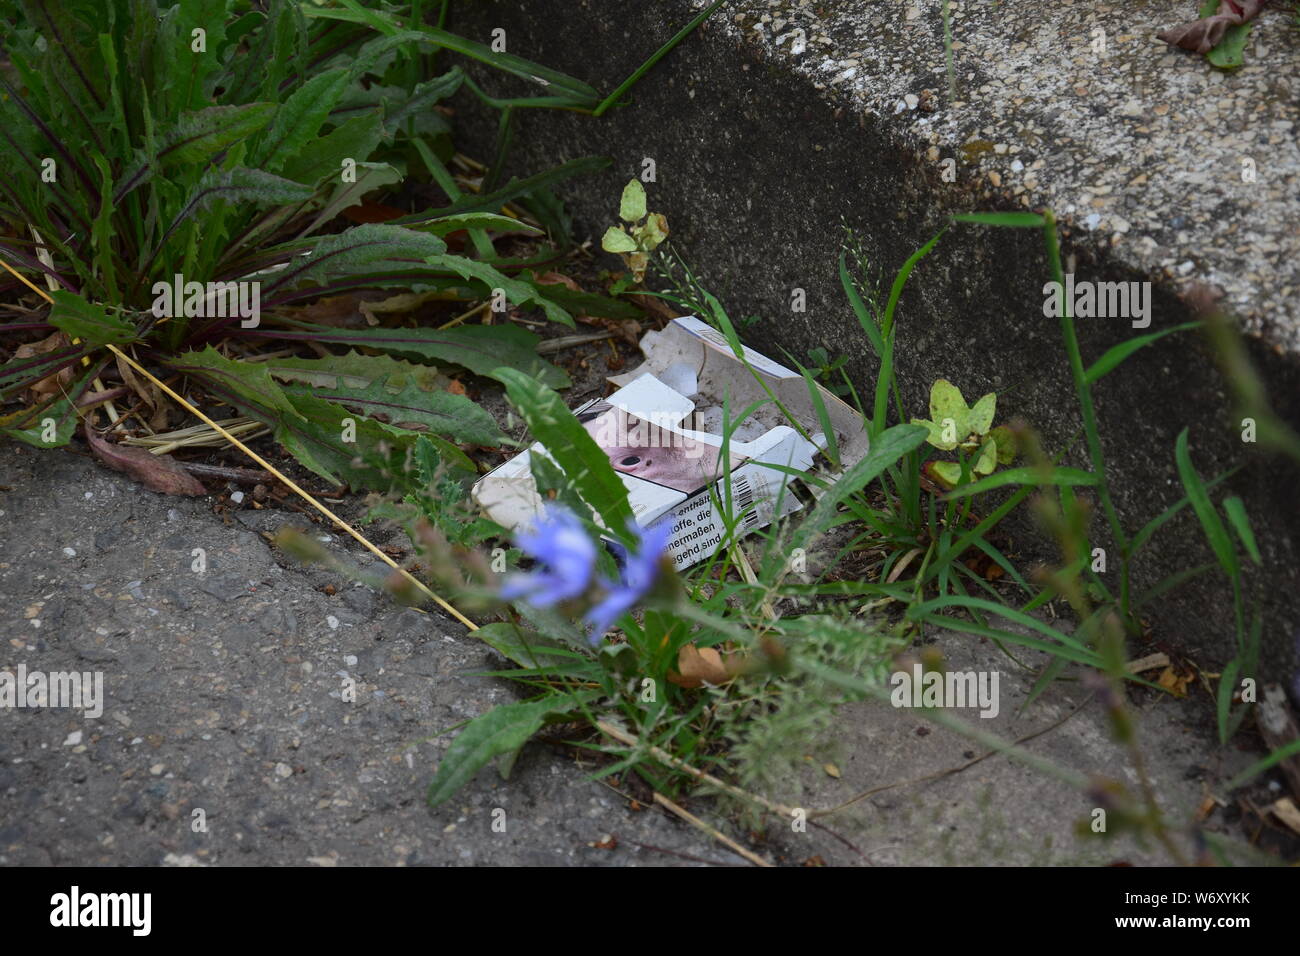 An empty cigarette pack lying on the roadside, carelessly discarded. Some weeds around. Stock Photo